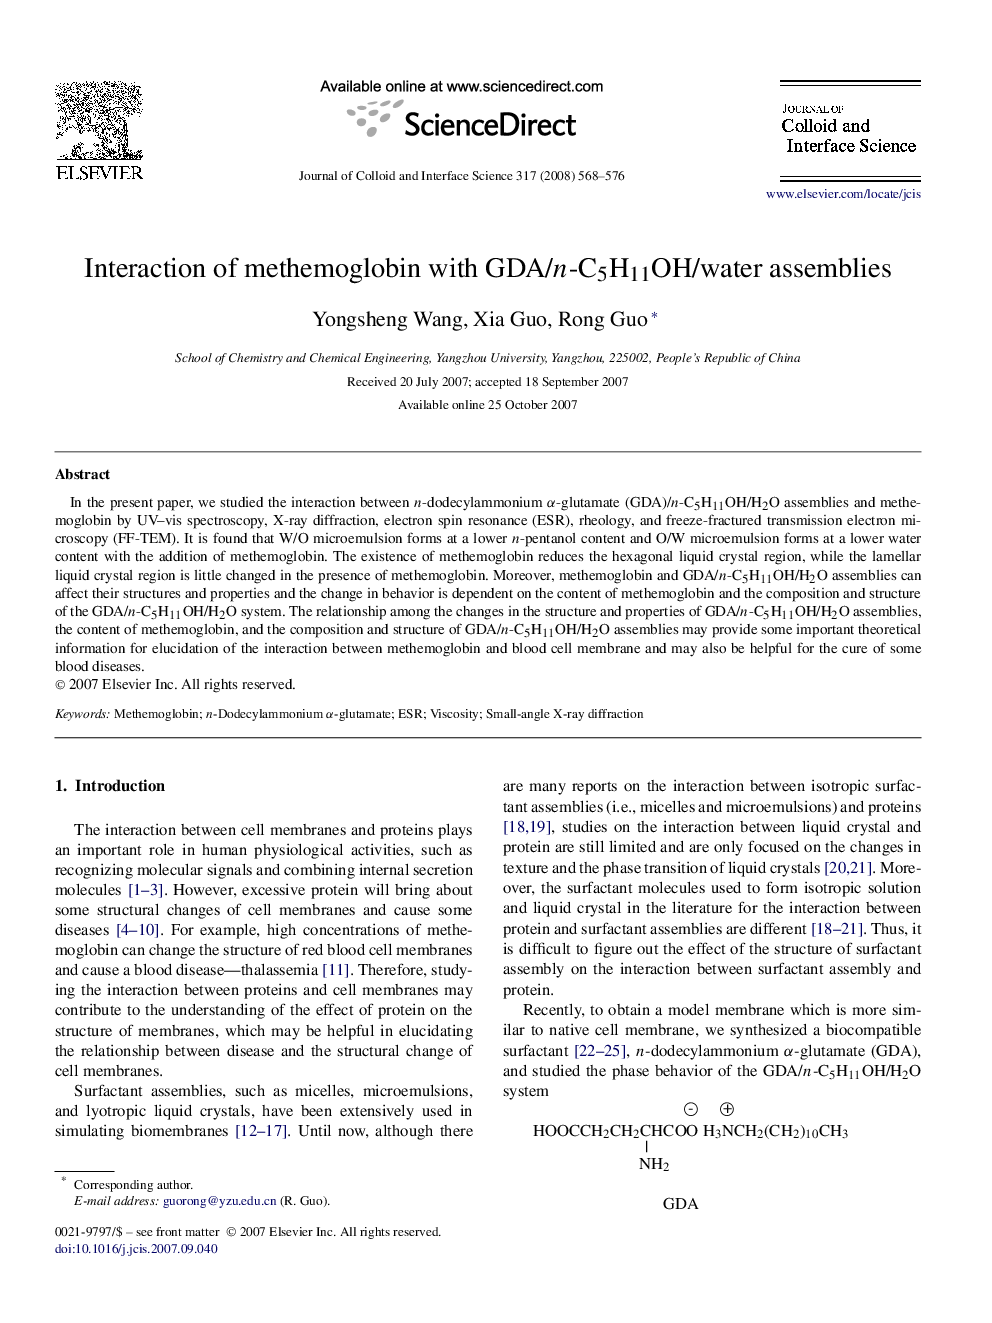 Interaction of methemoglobin with GDA/n-C5H11OH/water assemblies